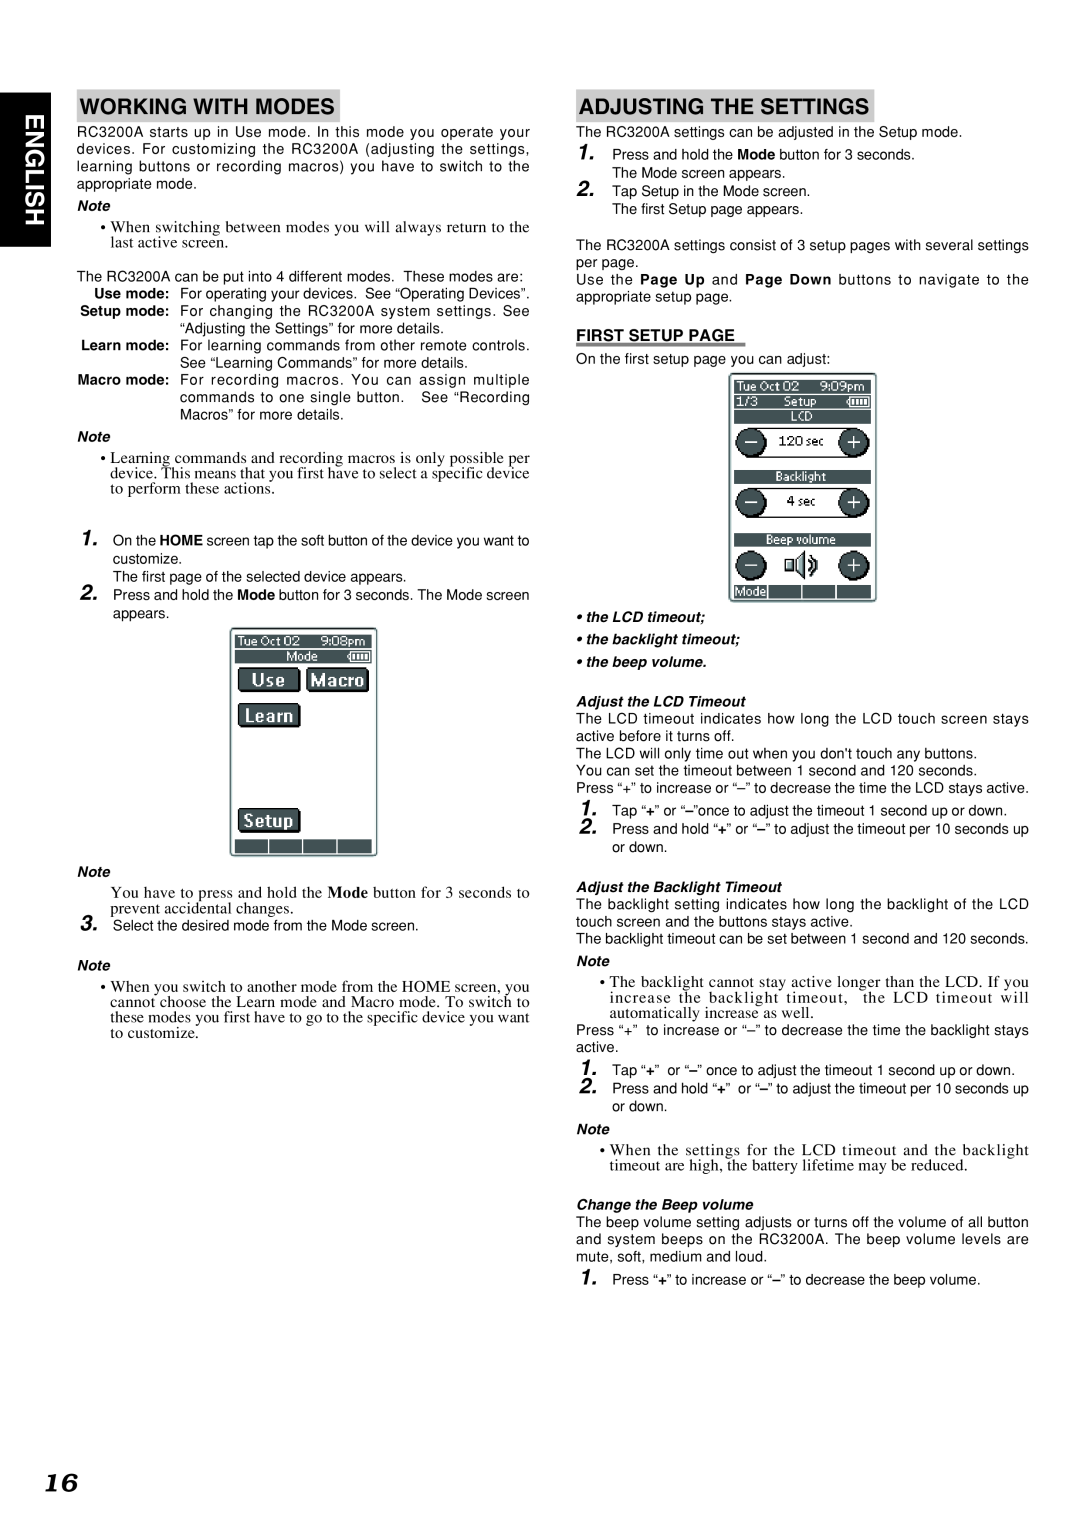 Marantz SR9200 manual English, Working With Modes, Adjusting The Settings, First Setup Page 